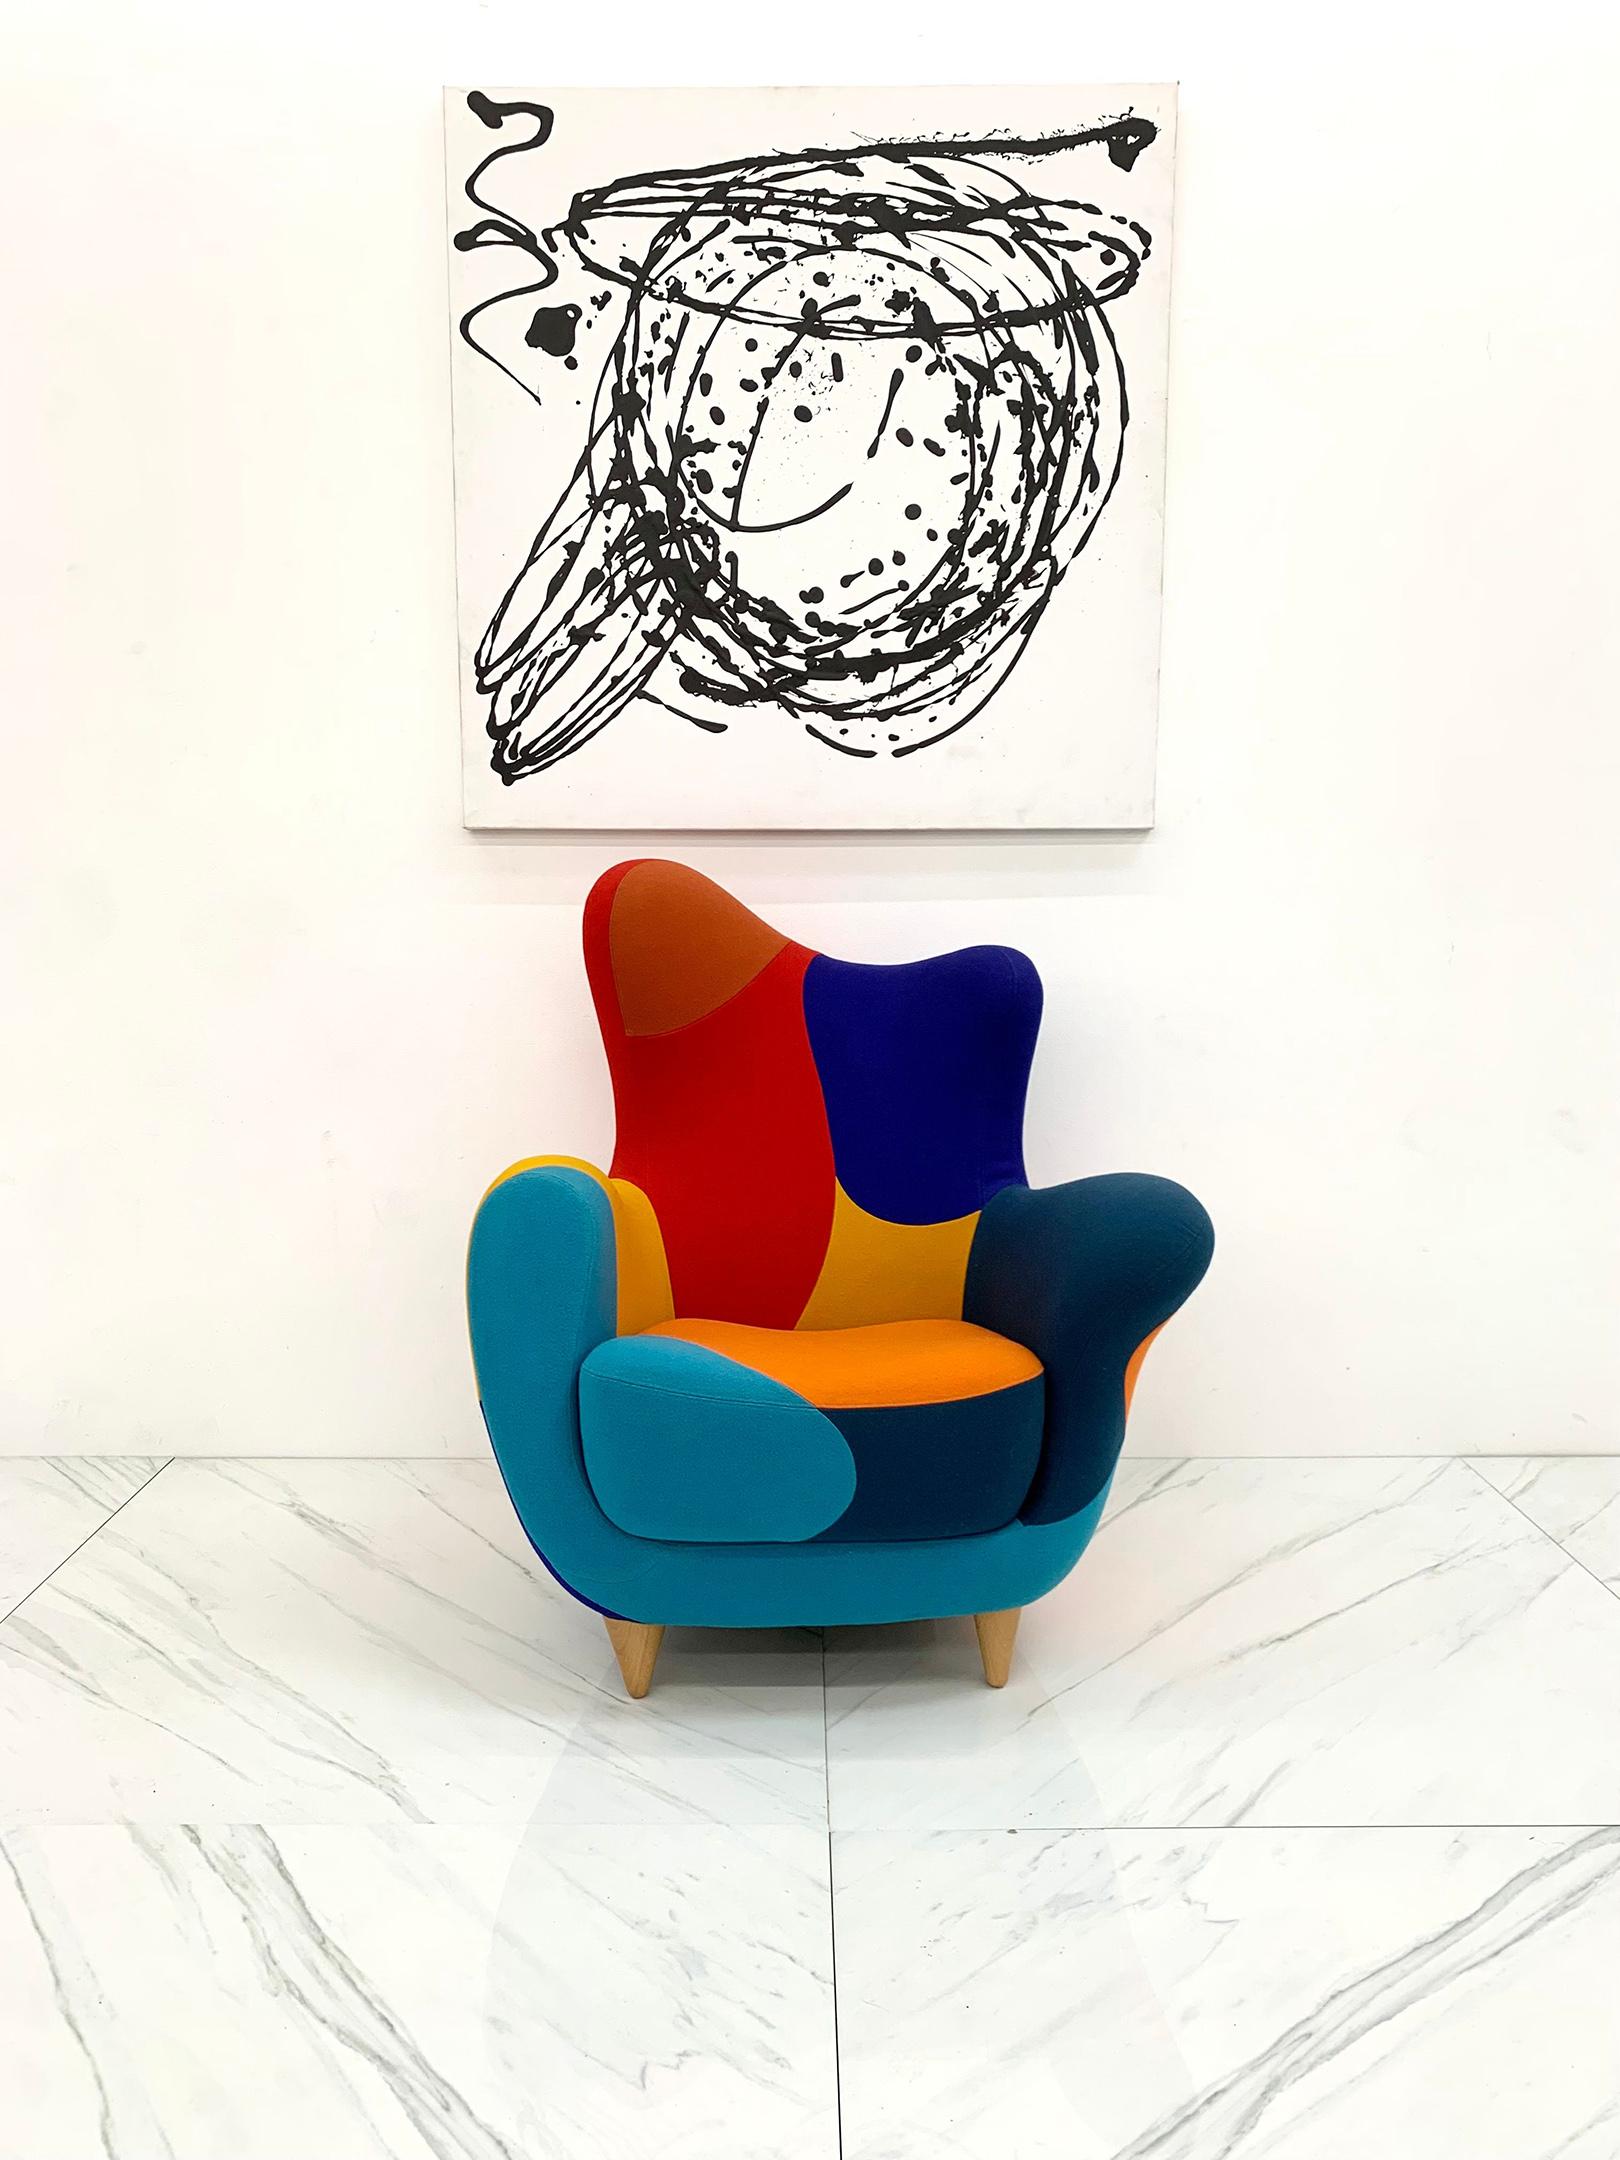 A gorgeous new arrival, this Alessandra armchair / wingback lounge designed by Javier Mariscal for Moroso is an armchair that is part of the collection Los Muebles Amorosos.

This splashy, playful wingback lounge chair brings a bold Memphis Milano